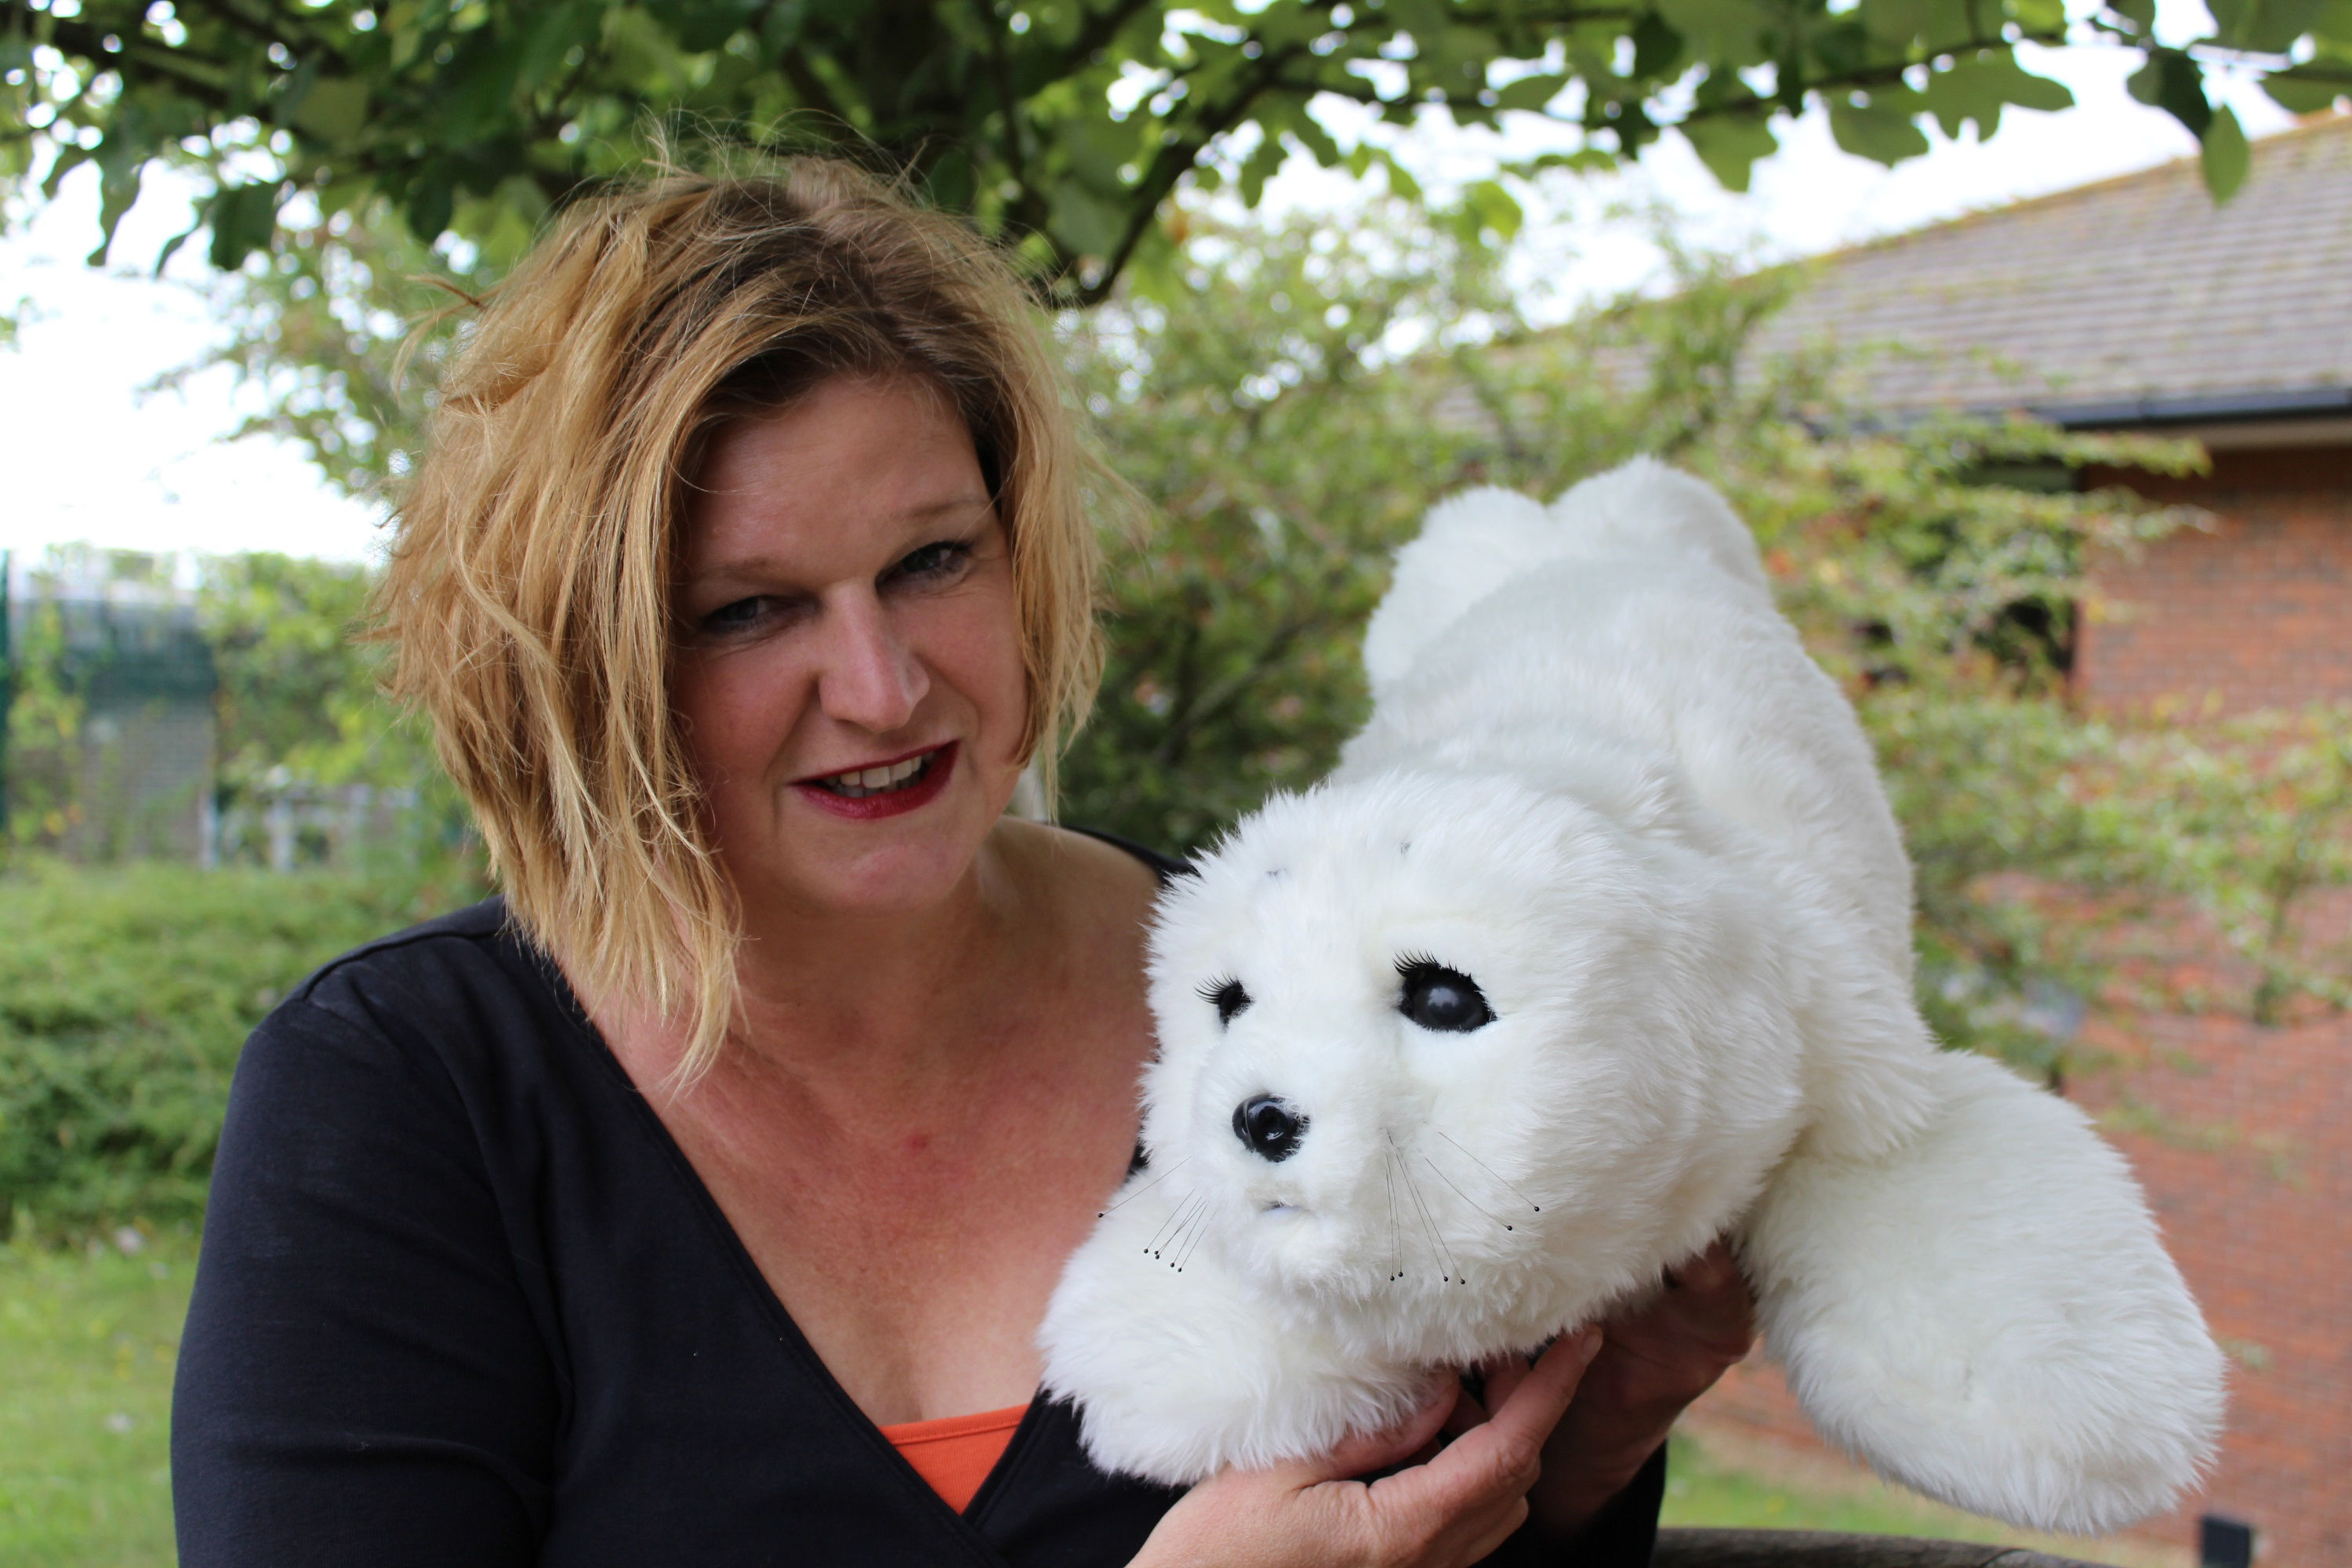 Dr Penny Dodds and a robotic seal. (University of Brighton/PA Wire)